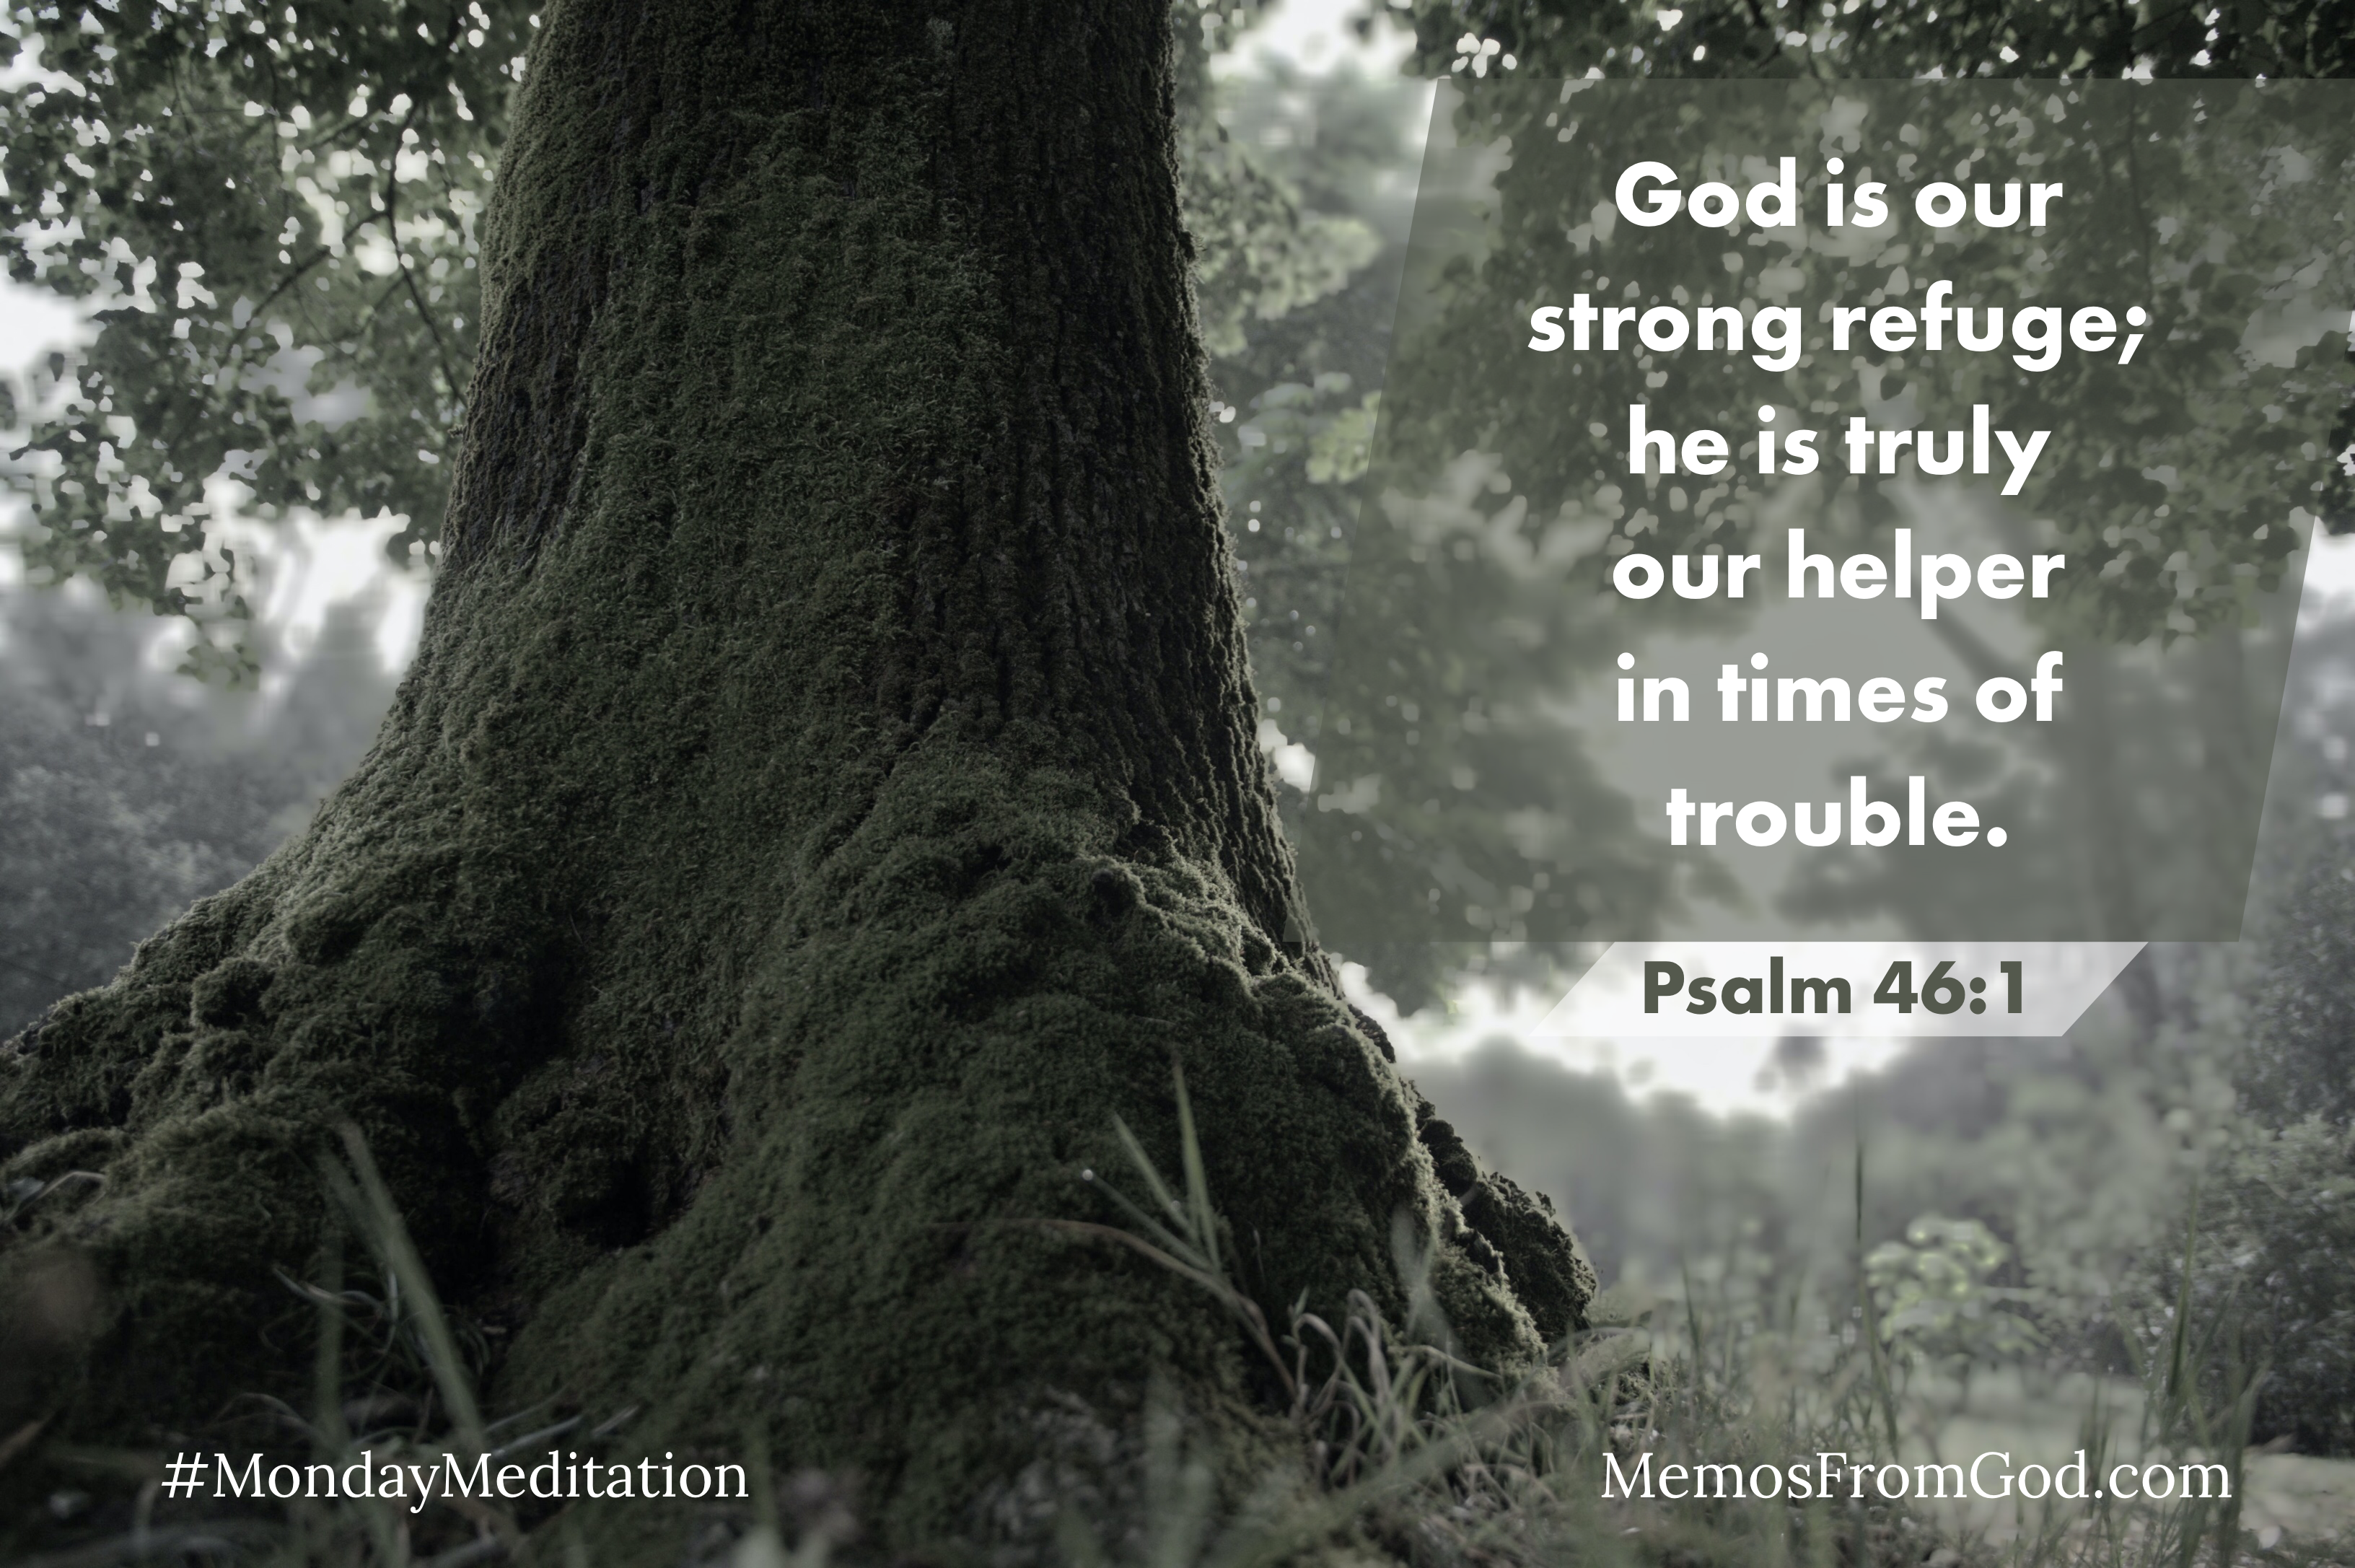 A black and white photo of a large, sturdy tree trunk with more trees in the background. Caption: God is our strong refuge; he is truly our helper in times of trouble. Psalm 46:1